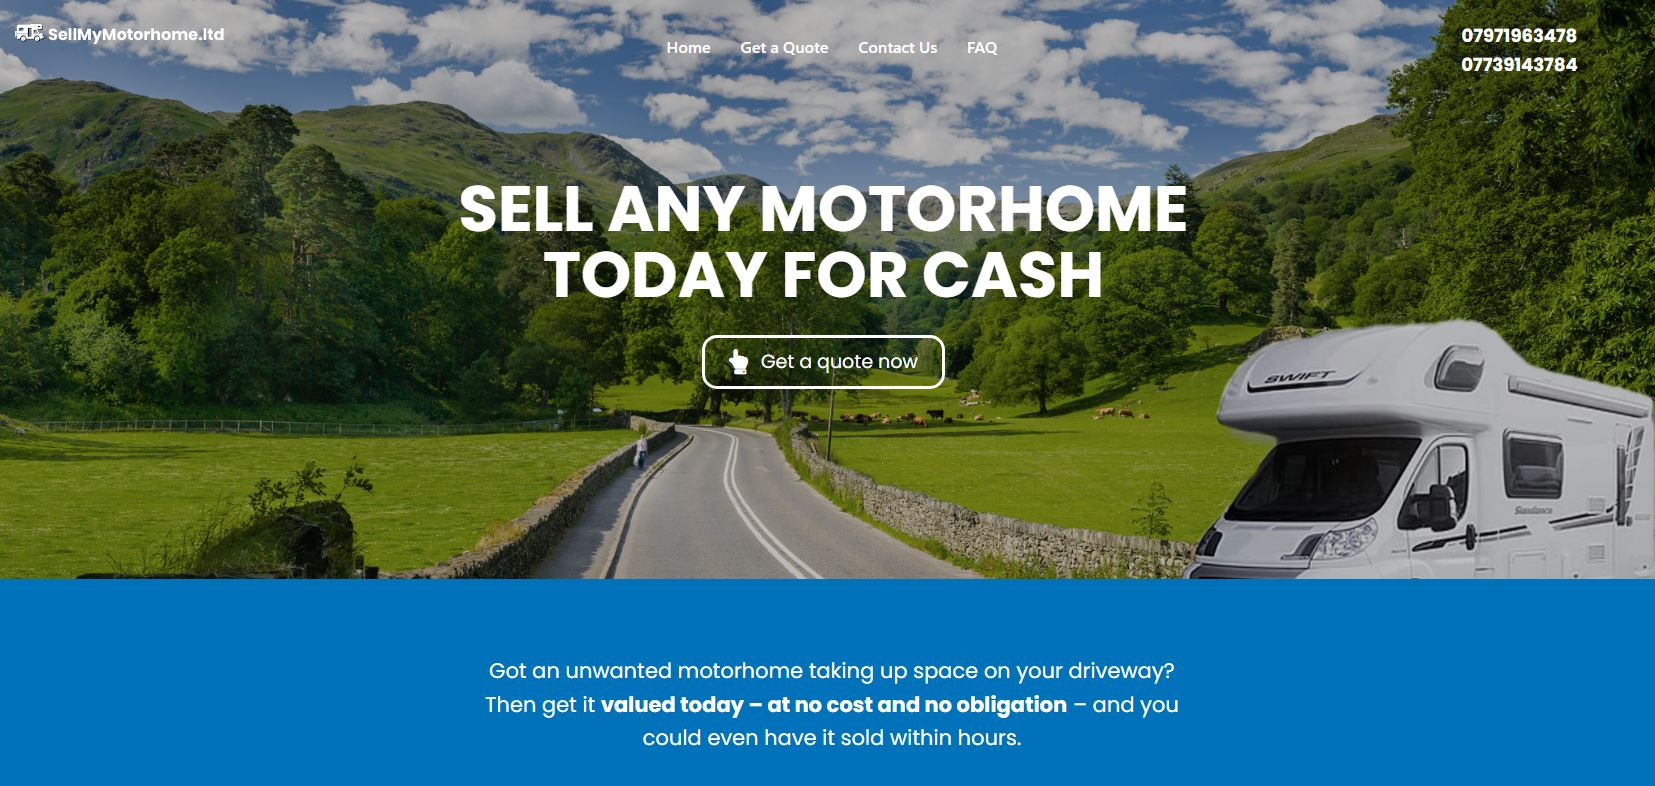 SellMyMotorhome.ltd offers a friendly solution for motorhome owners to sell their unwanted vehicles and get paid on collection.